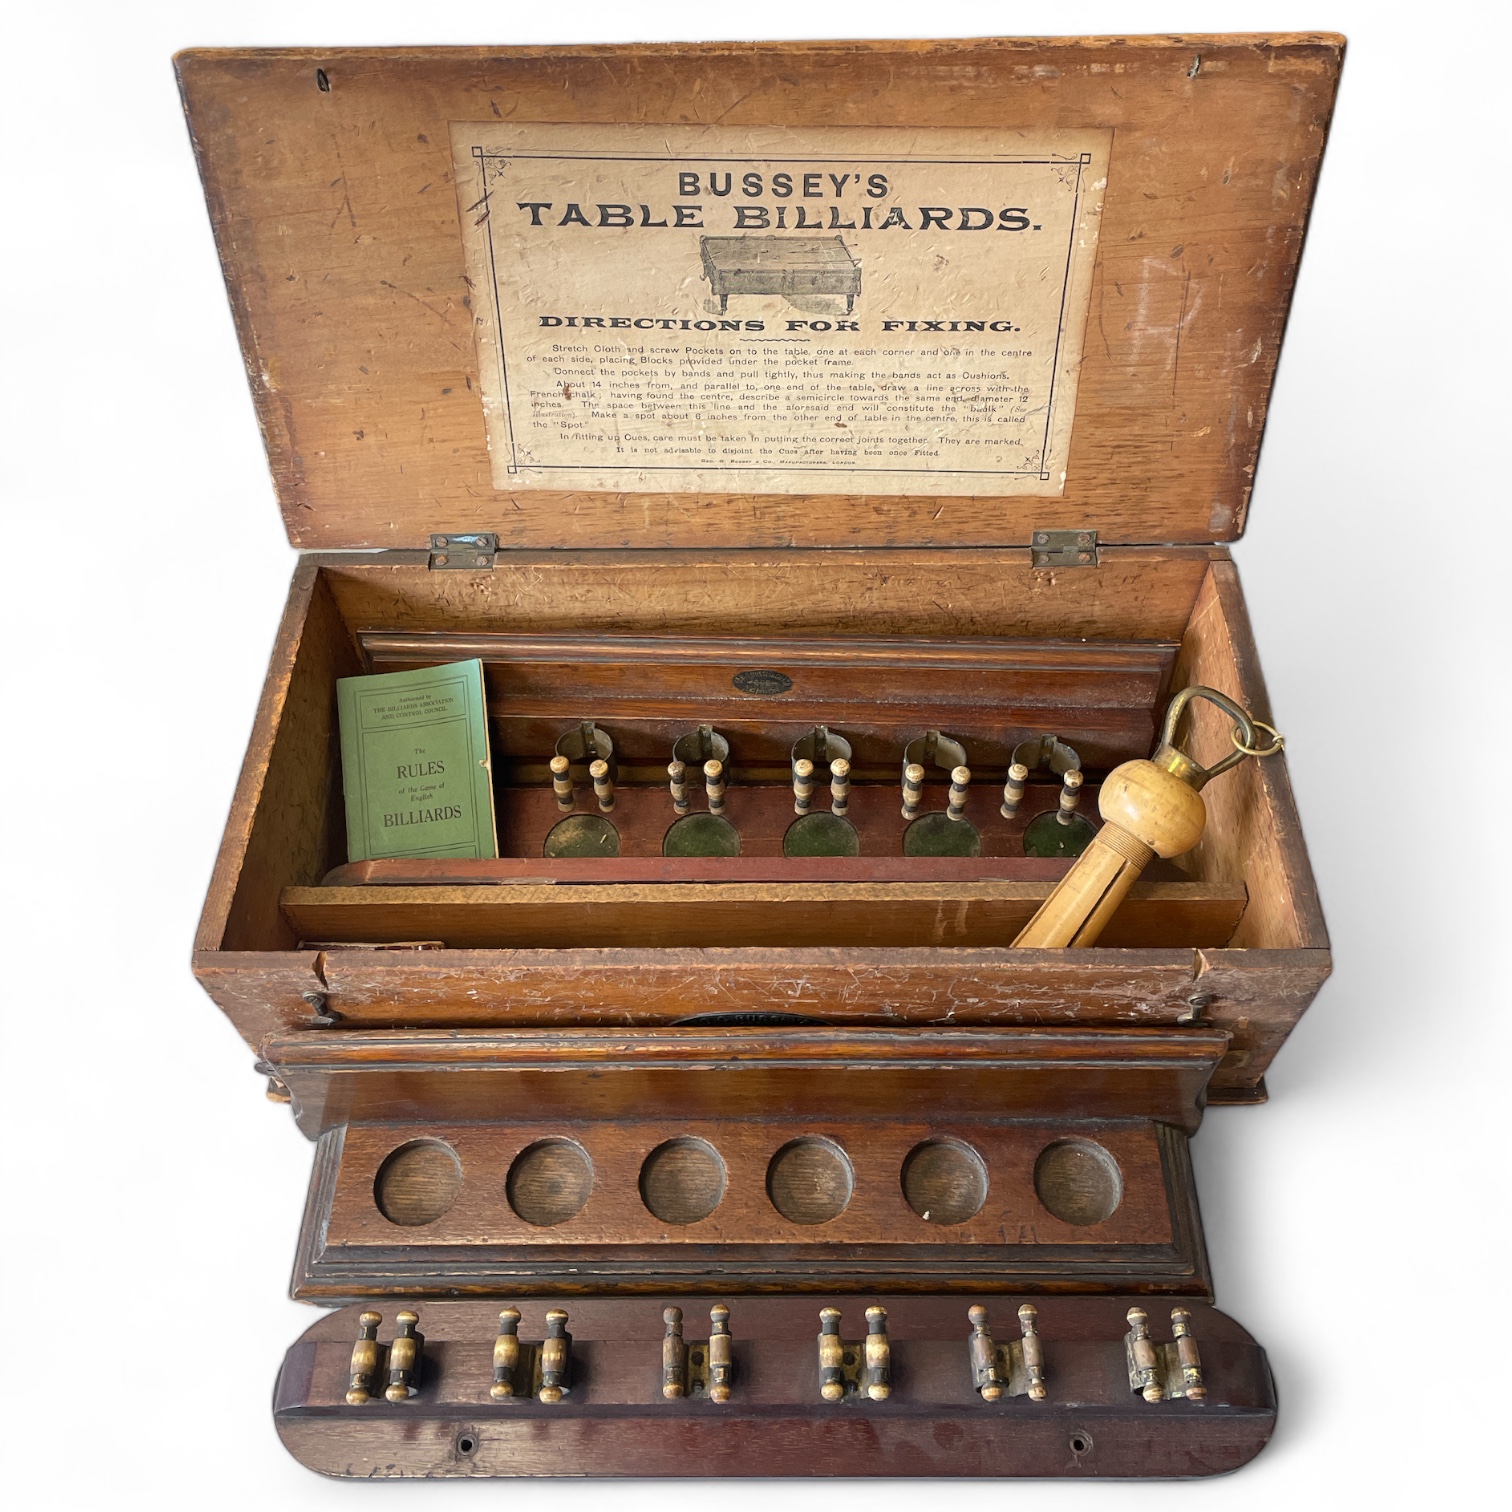 George Bussey & Co Ltd, two snooker/billiard cues wall mounted stands in a table billiards box. (one